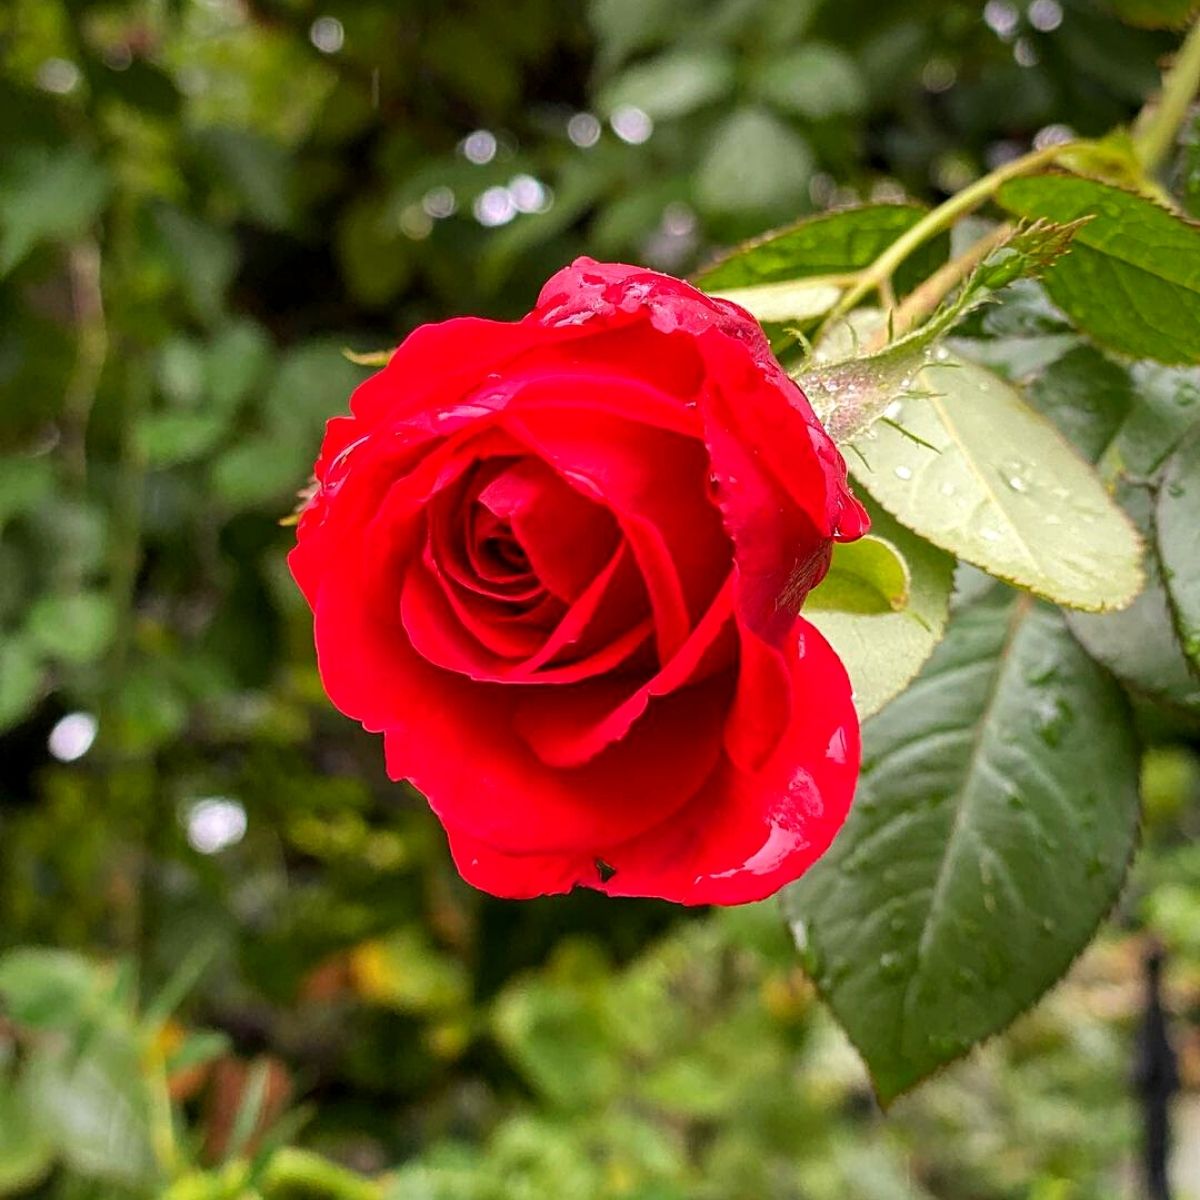 Celebrate National Red Rose Day with these red roses